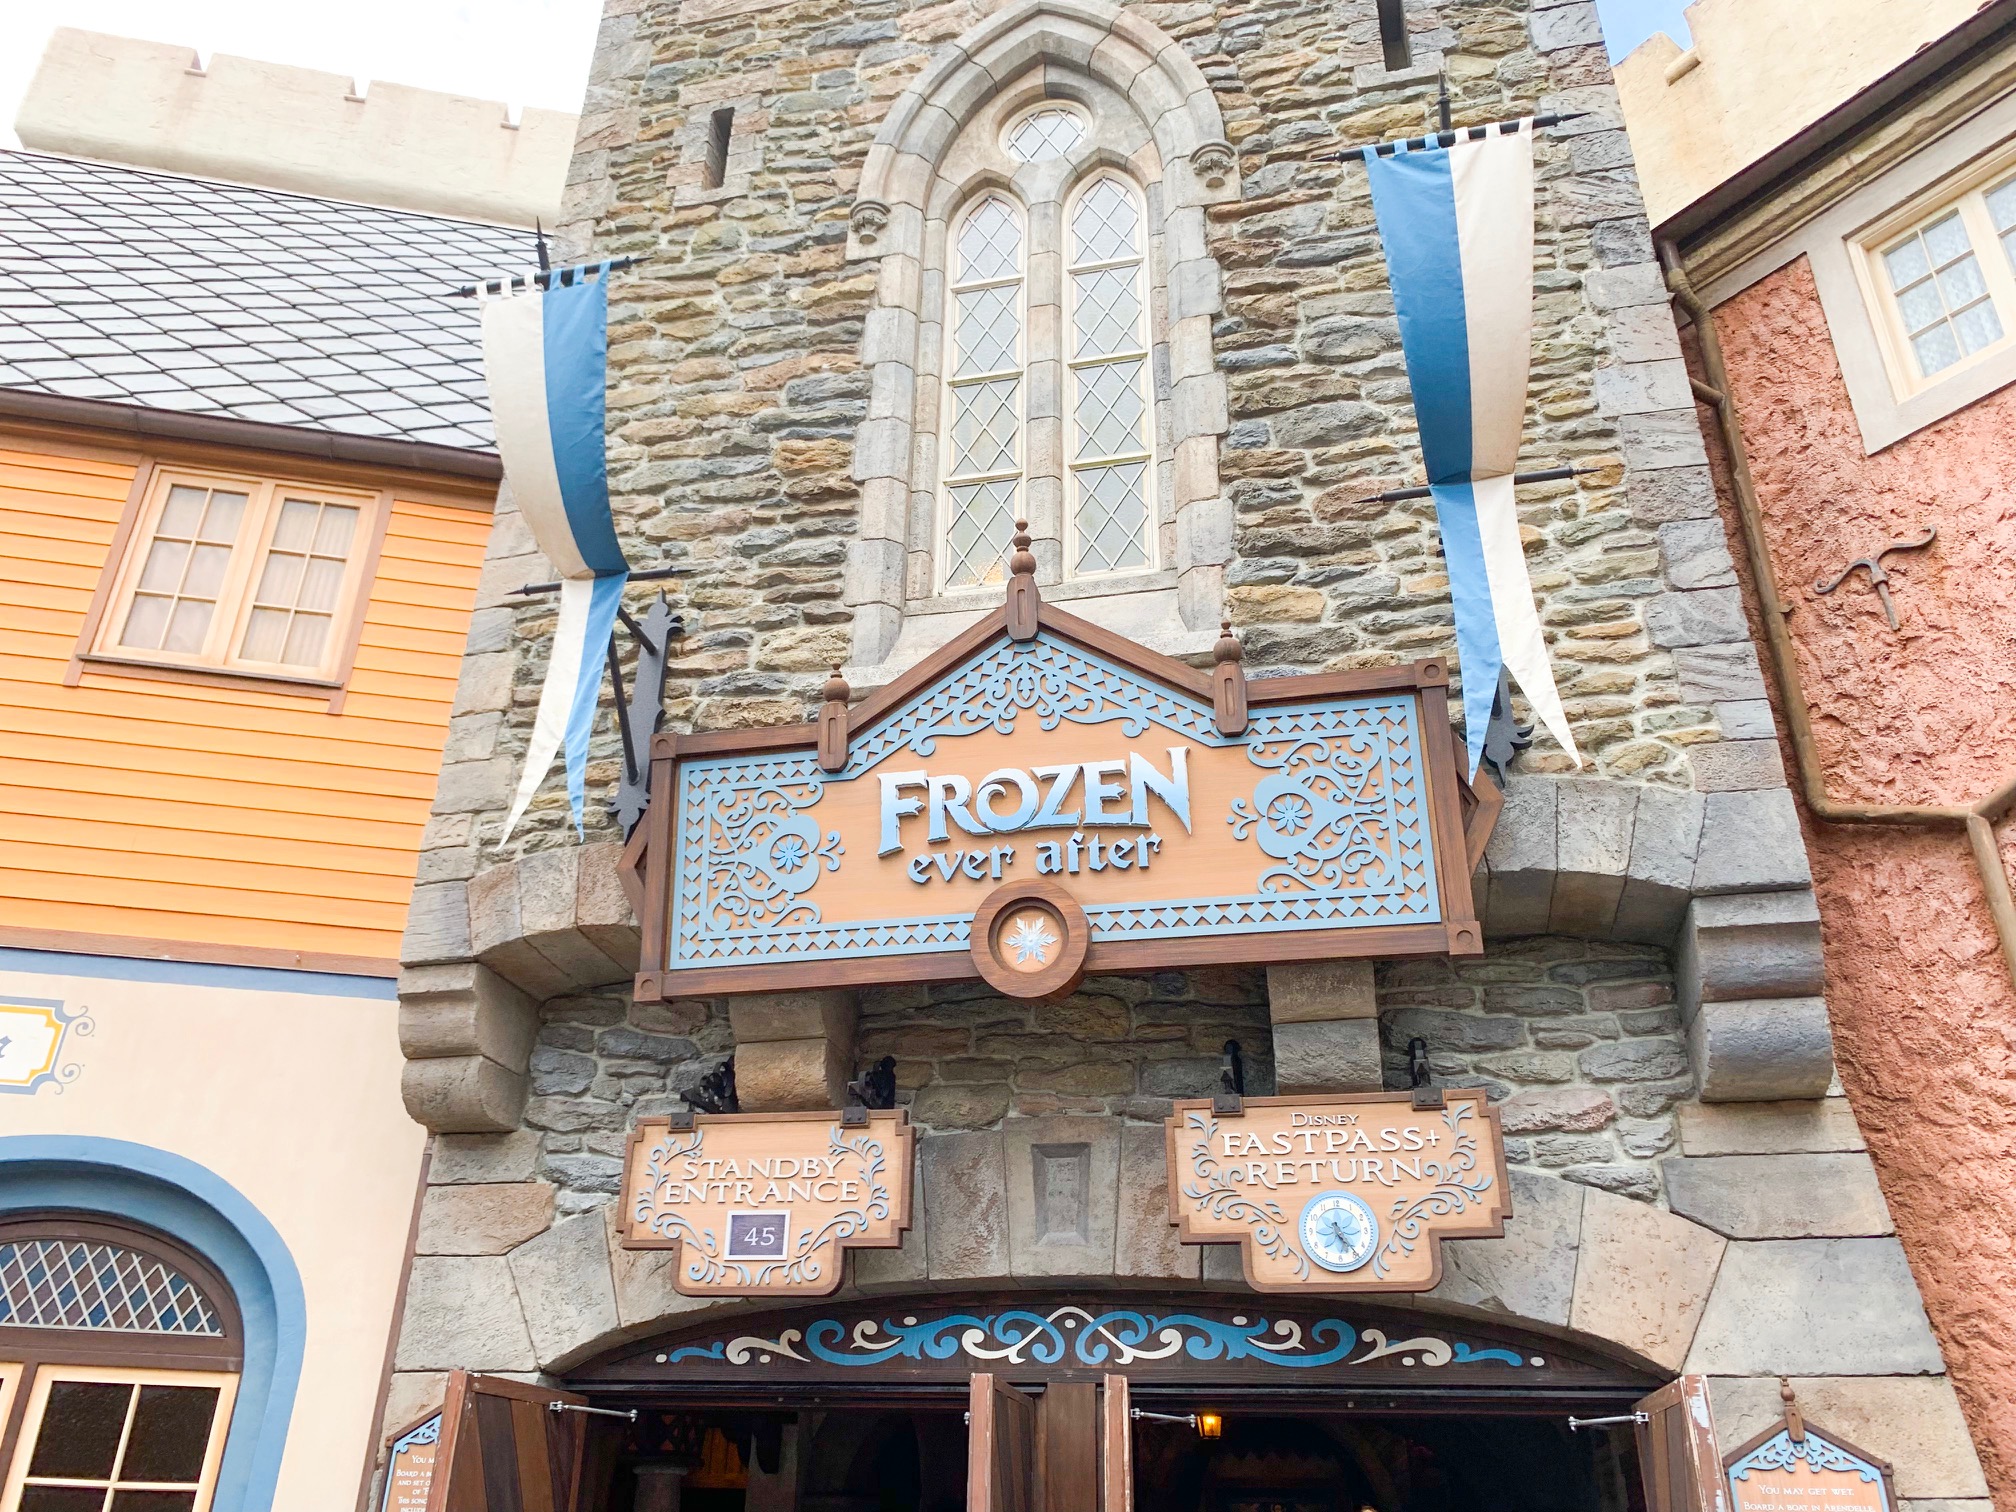 Frozen is one of the best rides at Epcot